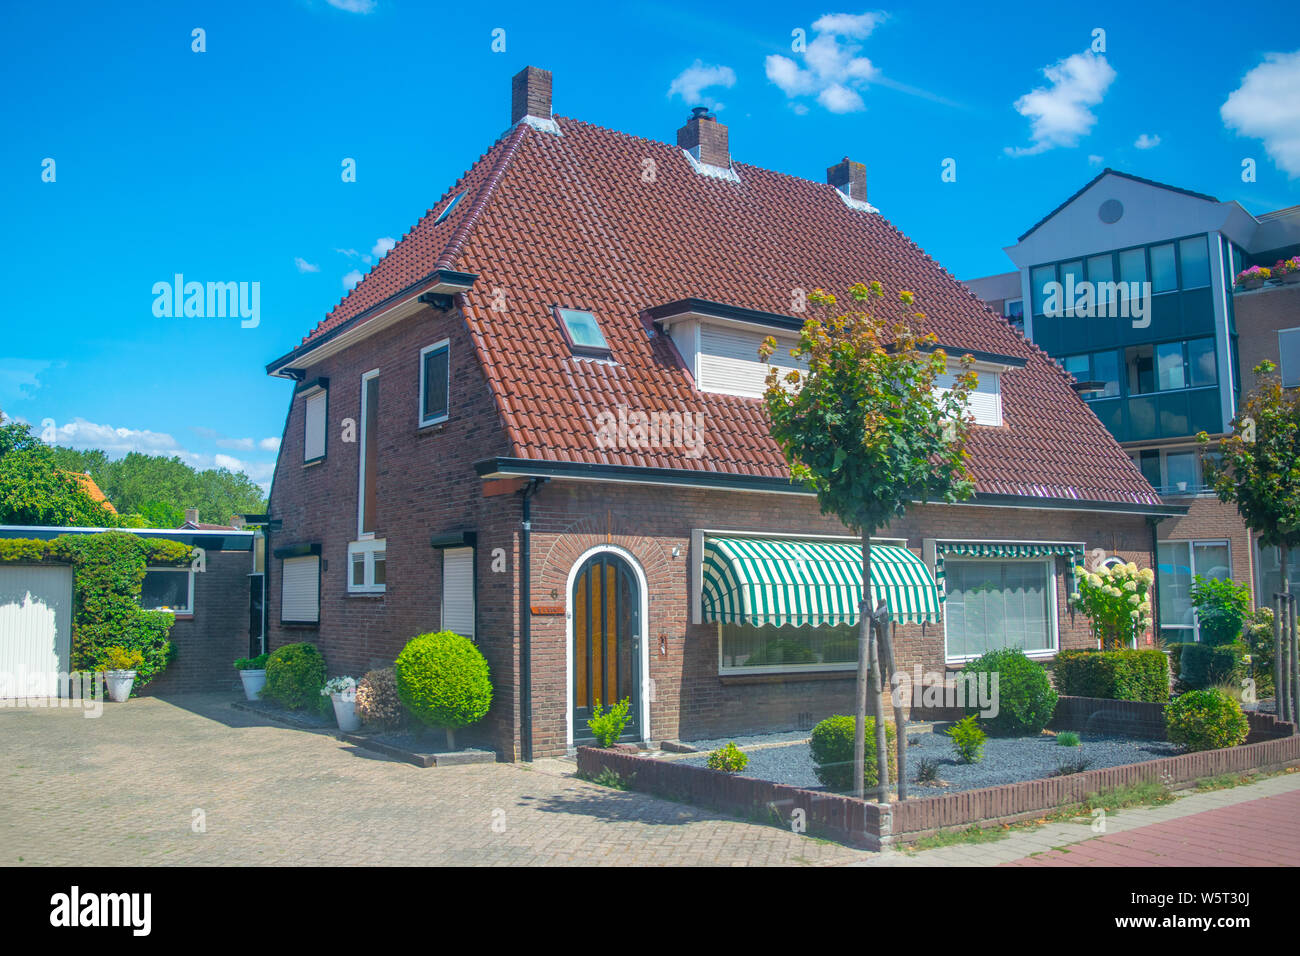 Typical Dutch family house, architecture in Netherlands Stock Photo